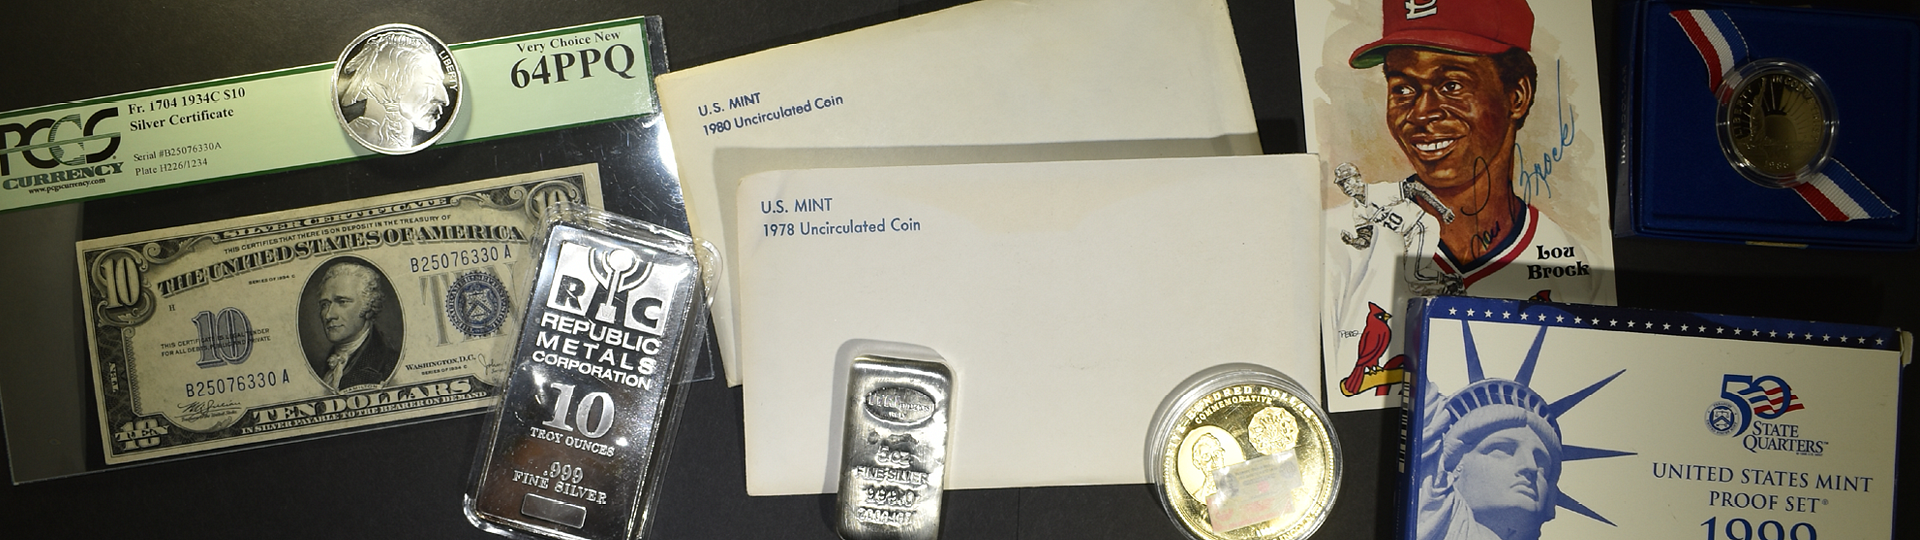 April 25th Silver City Rare Coins & Sports by Silver City Auctions